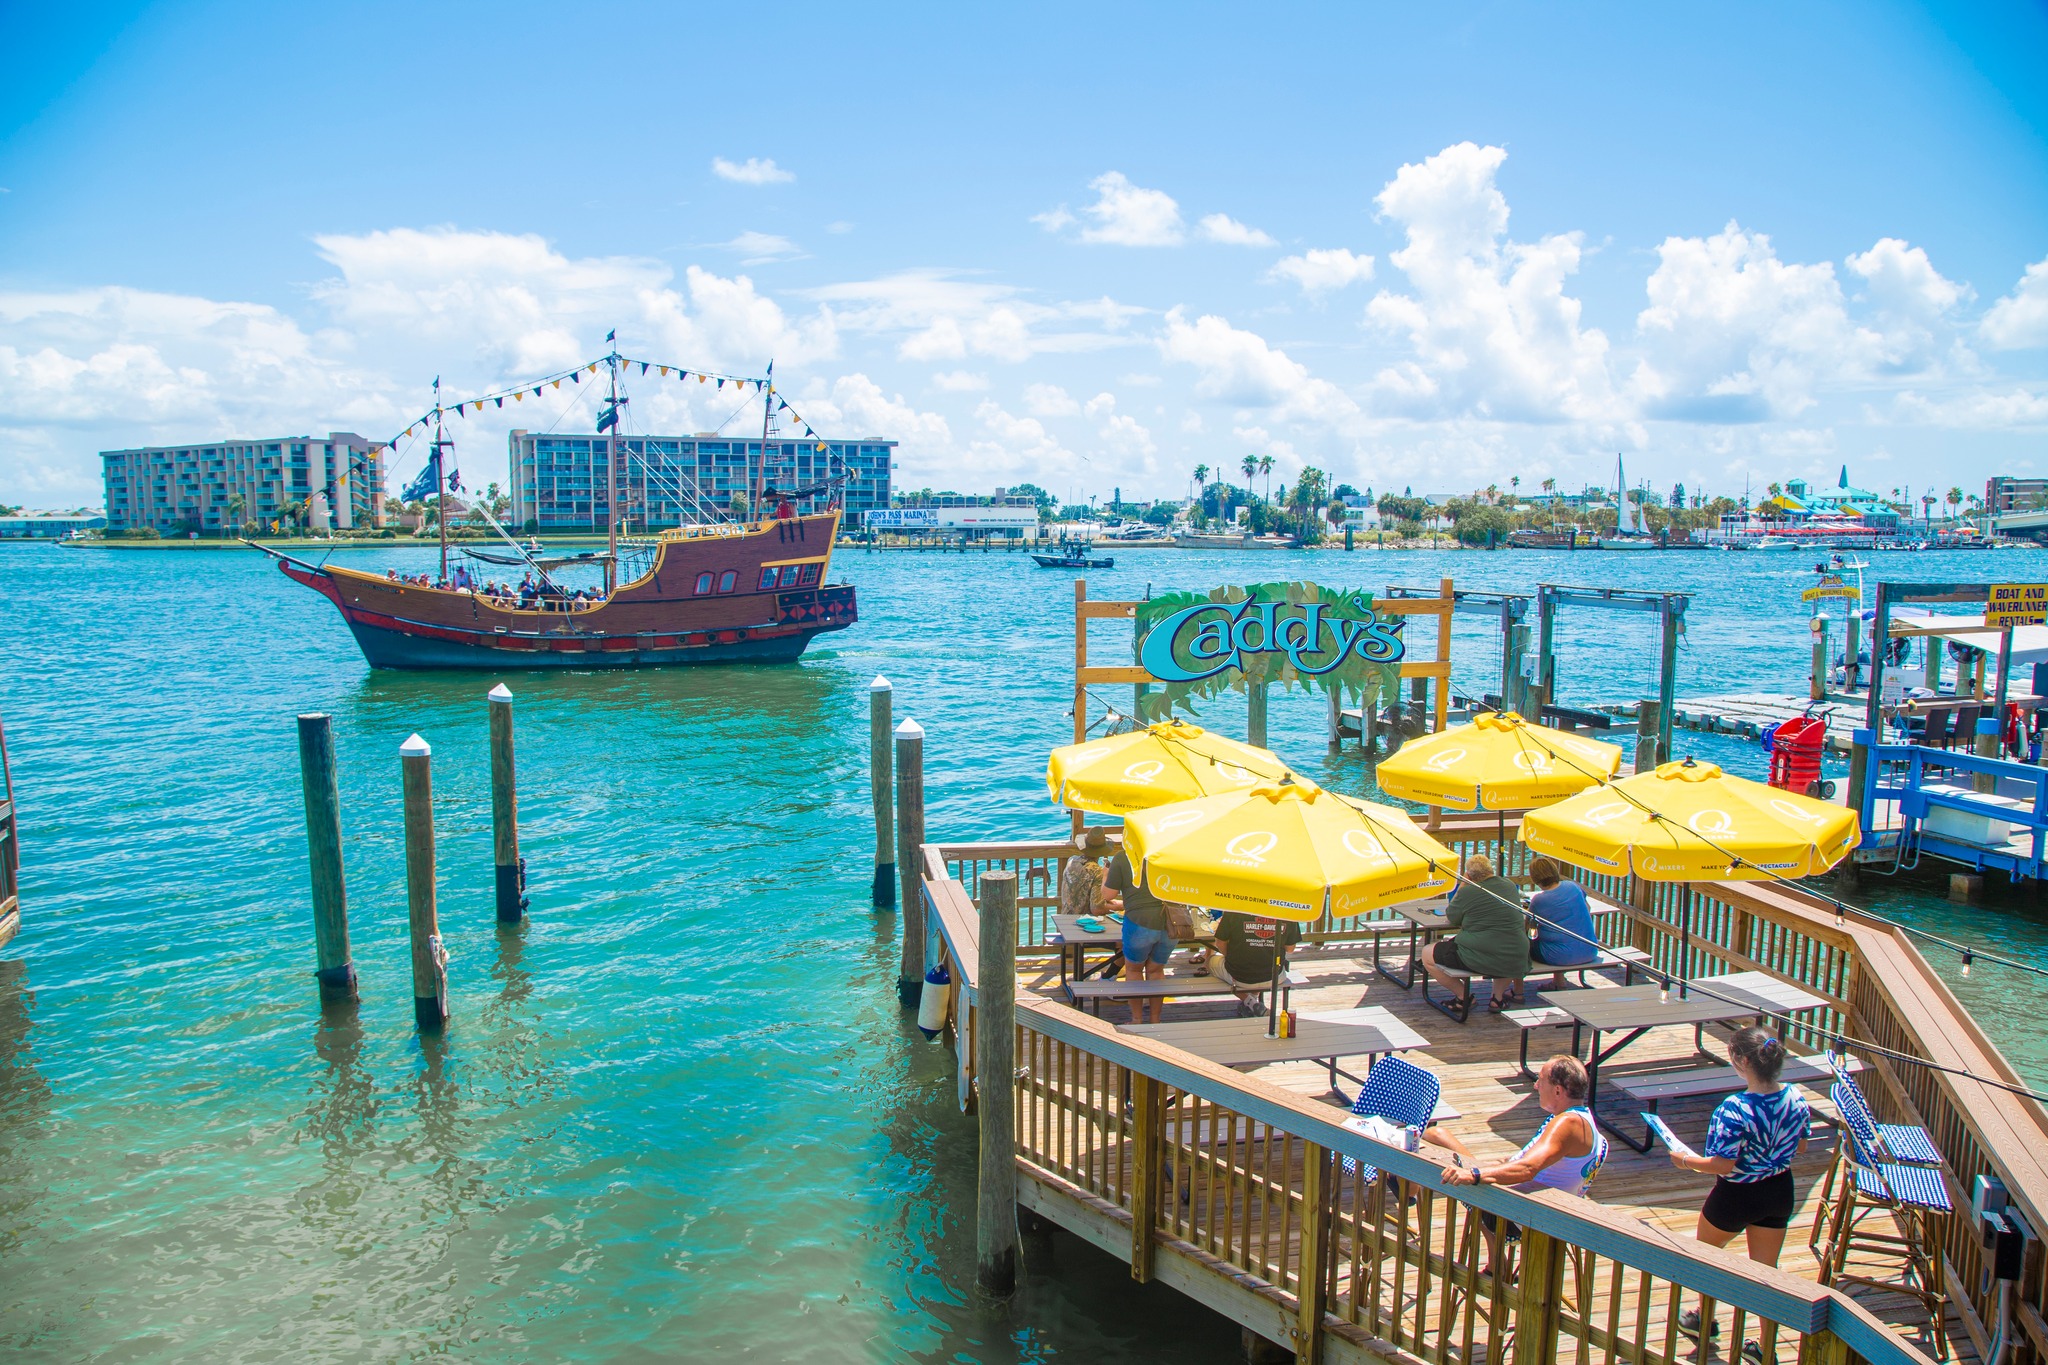 Top 10 Johns Pass restaurants to check out when you visit